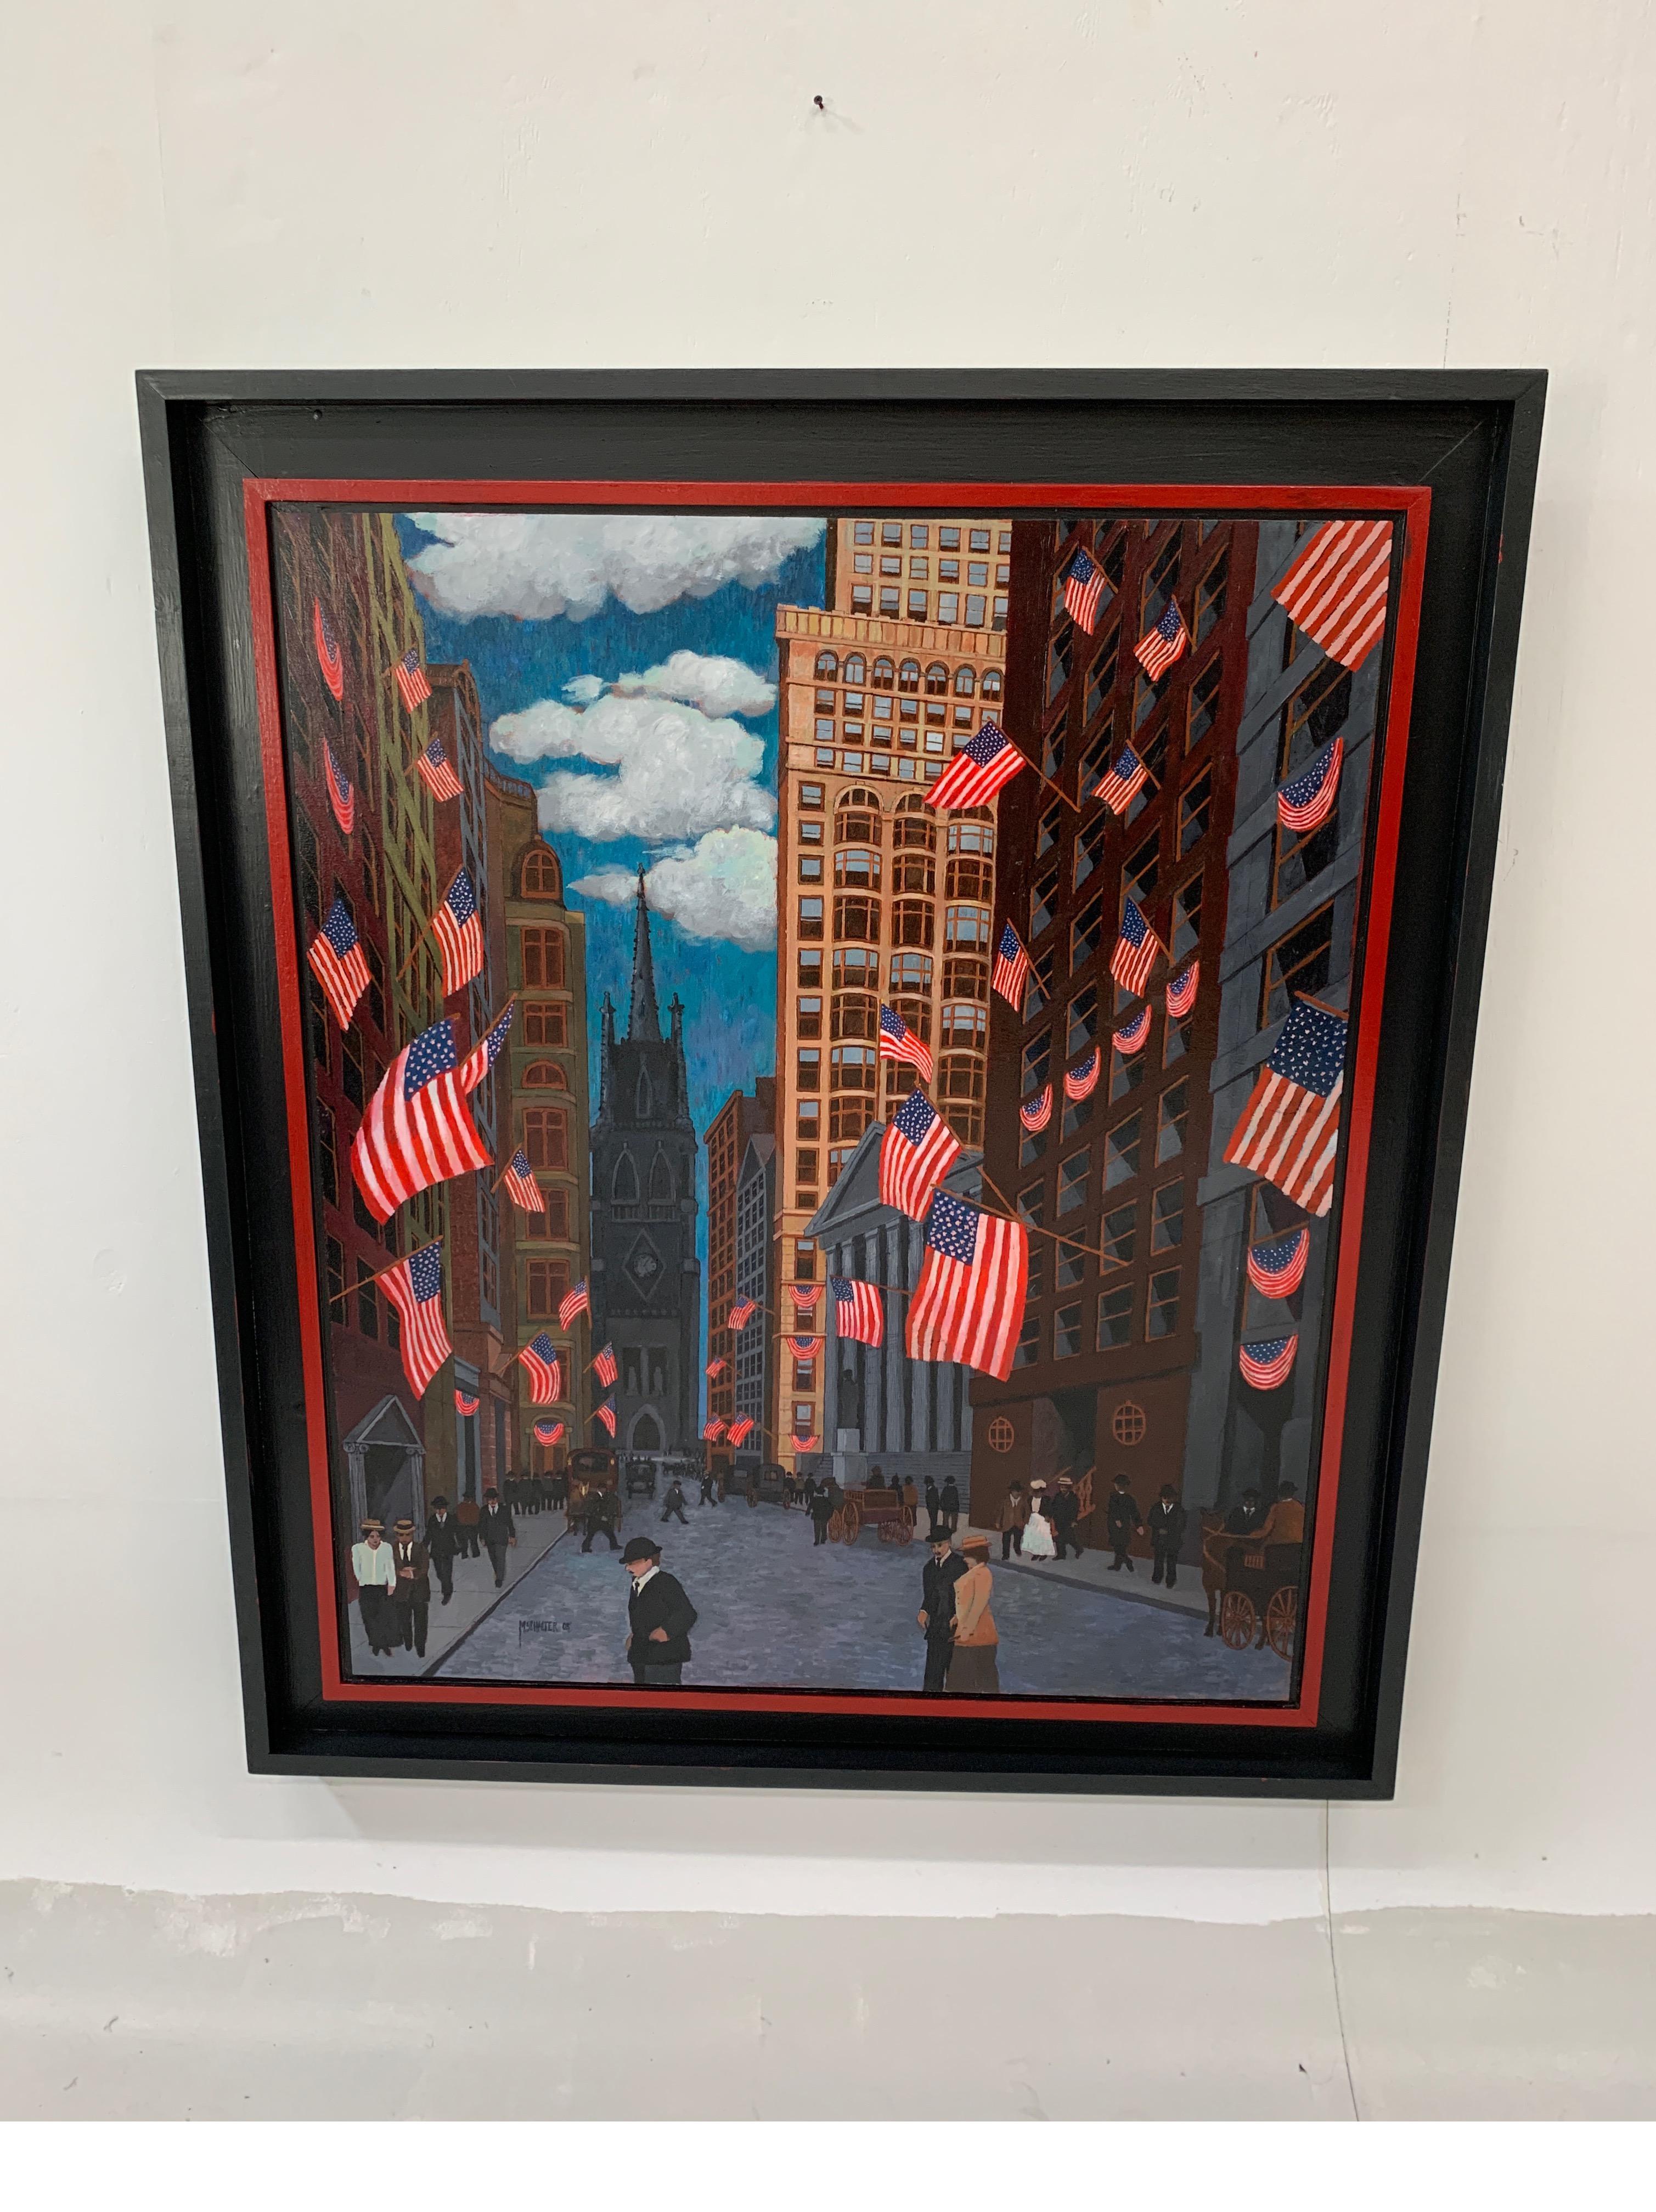 A vibrant oil painting of Wall Street NYC showing St. Marks church in the background. The cityscape is decorated for the Fourth of July, depicting the early part of the 20th century, circa 1905. The artist captured the time period from actual photos